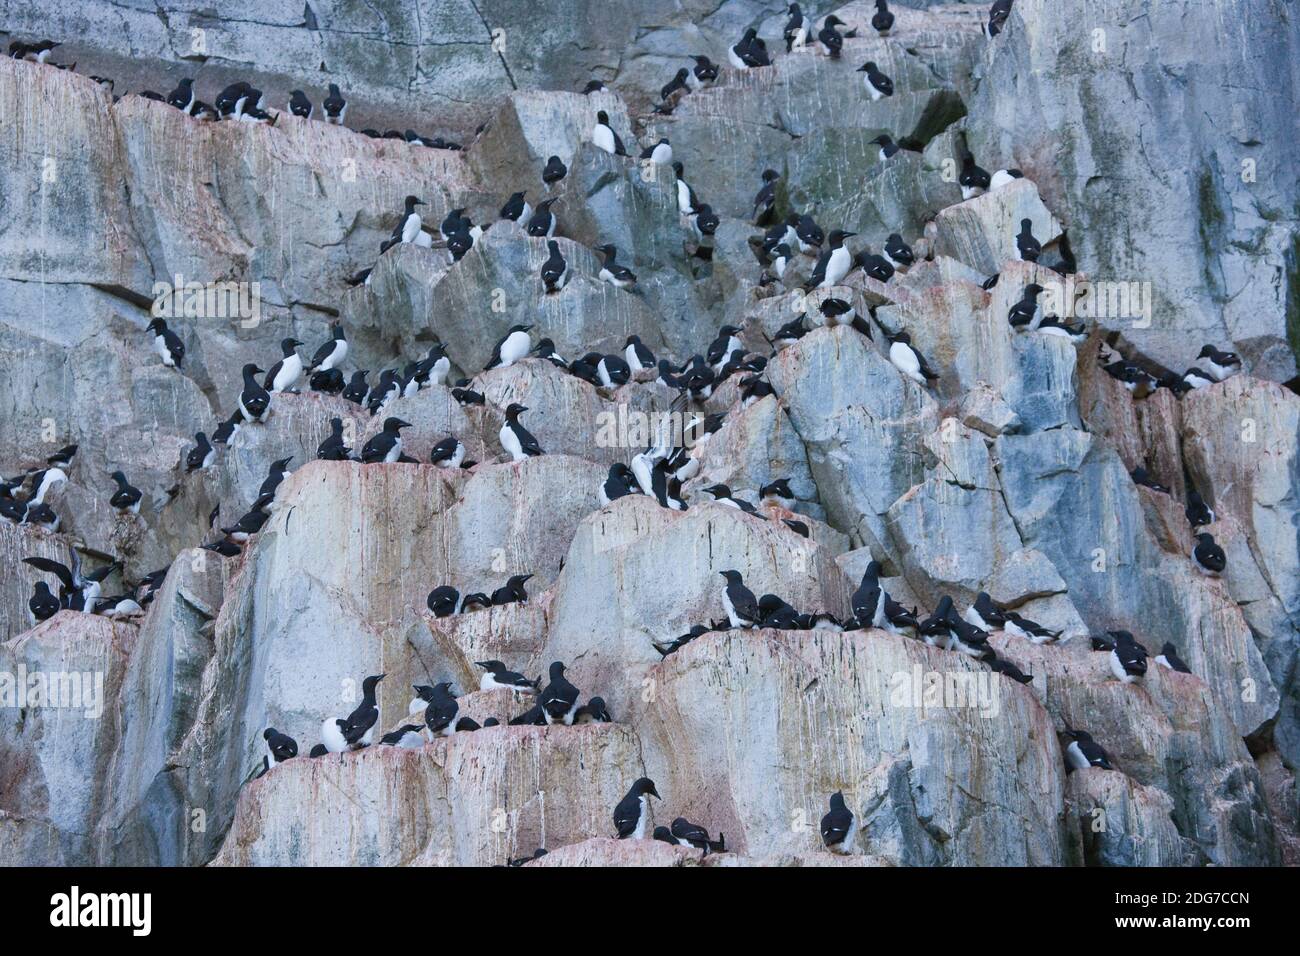 Bird colony at Alkefjellet, basalt cliff bustling with 60,000 breeding pairs of Brunnich's guillemots, Spitsbergen, Norway Stock Photo